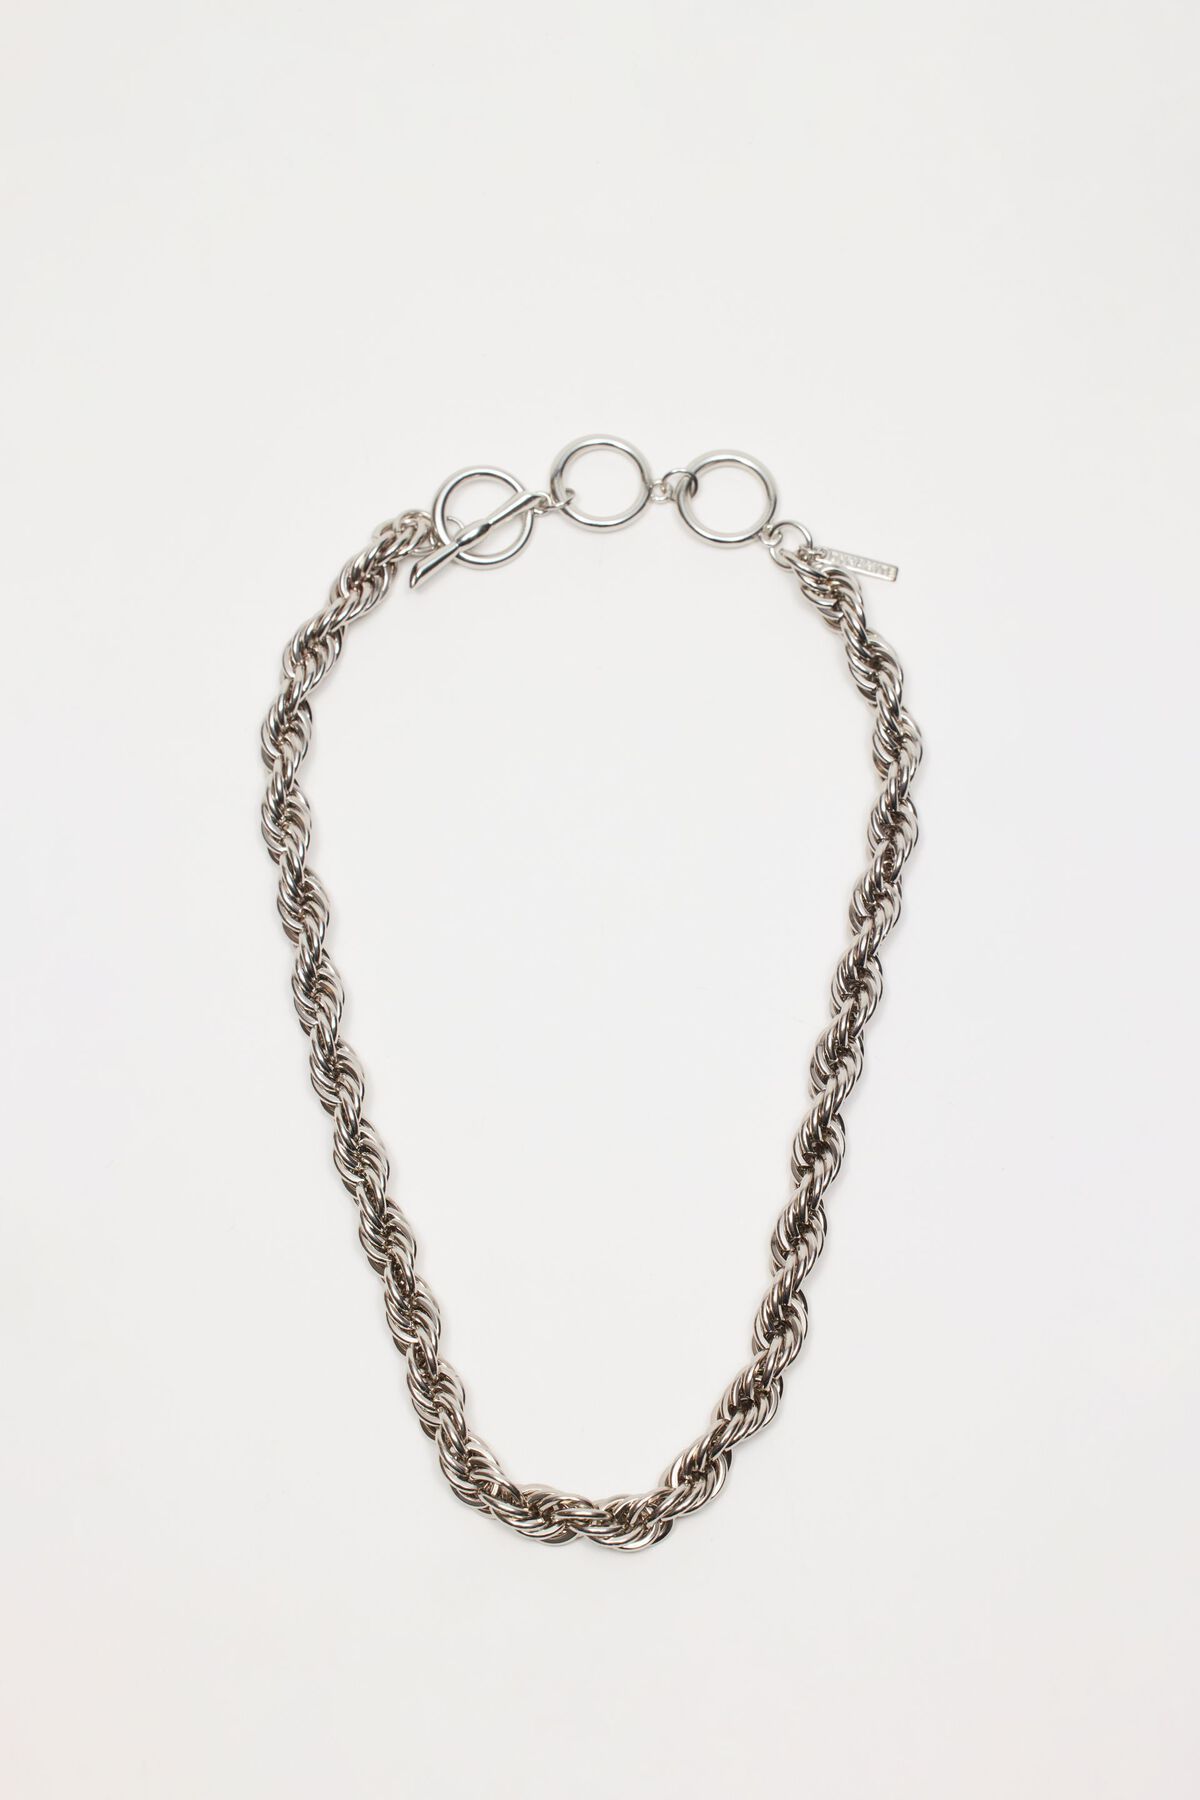 Dynamite Twisted Rope Chain Necklace. 2